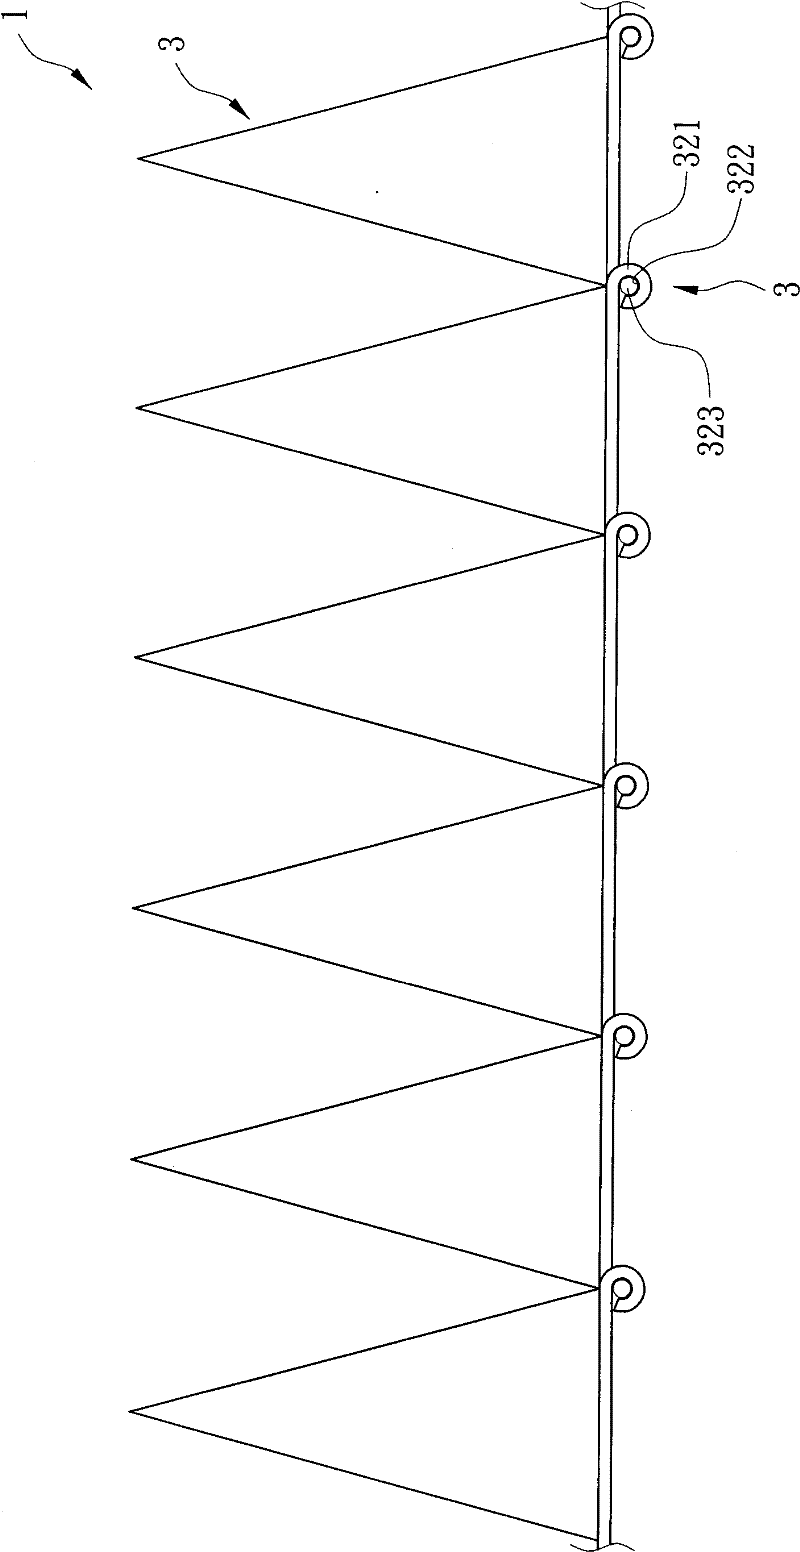 Tapered stereo-shaped array solar cell power generation system